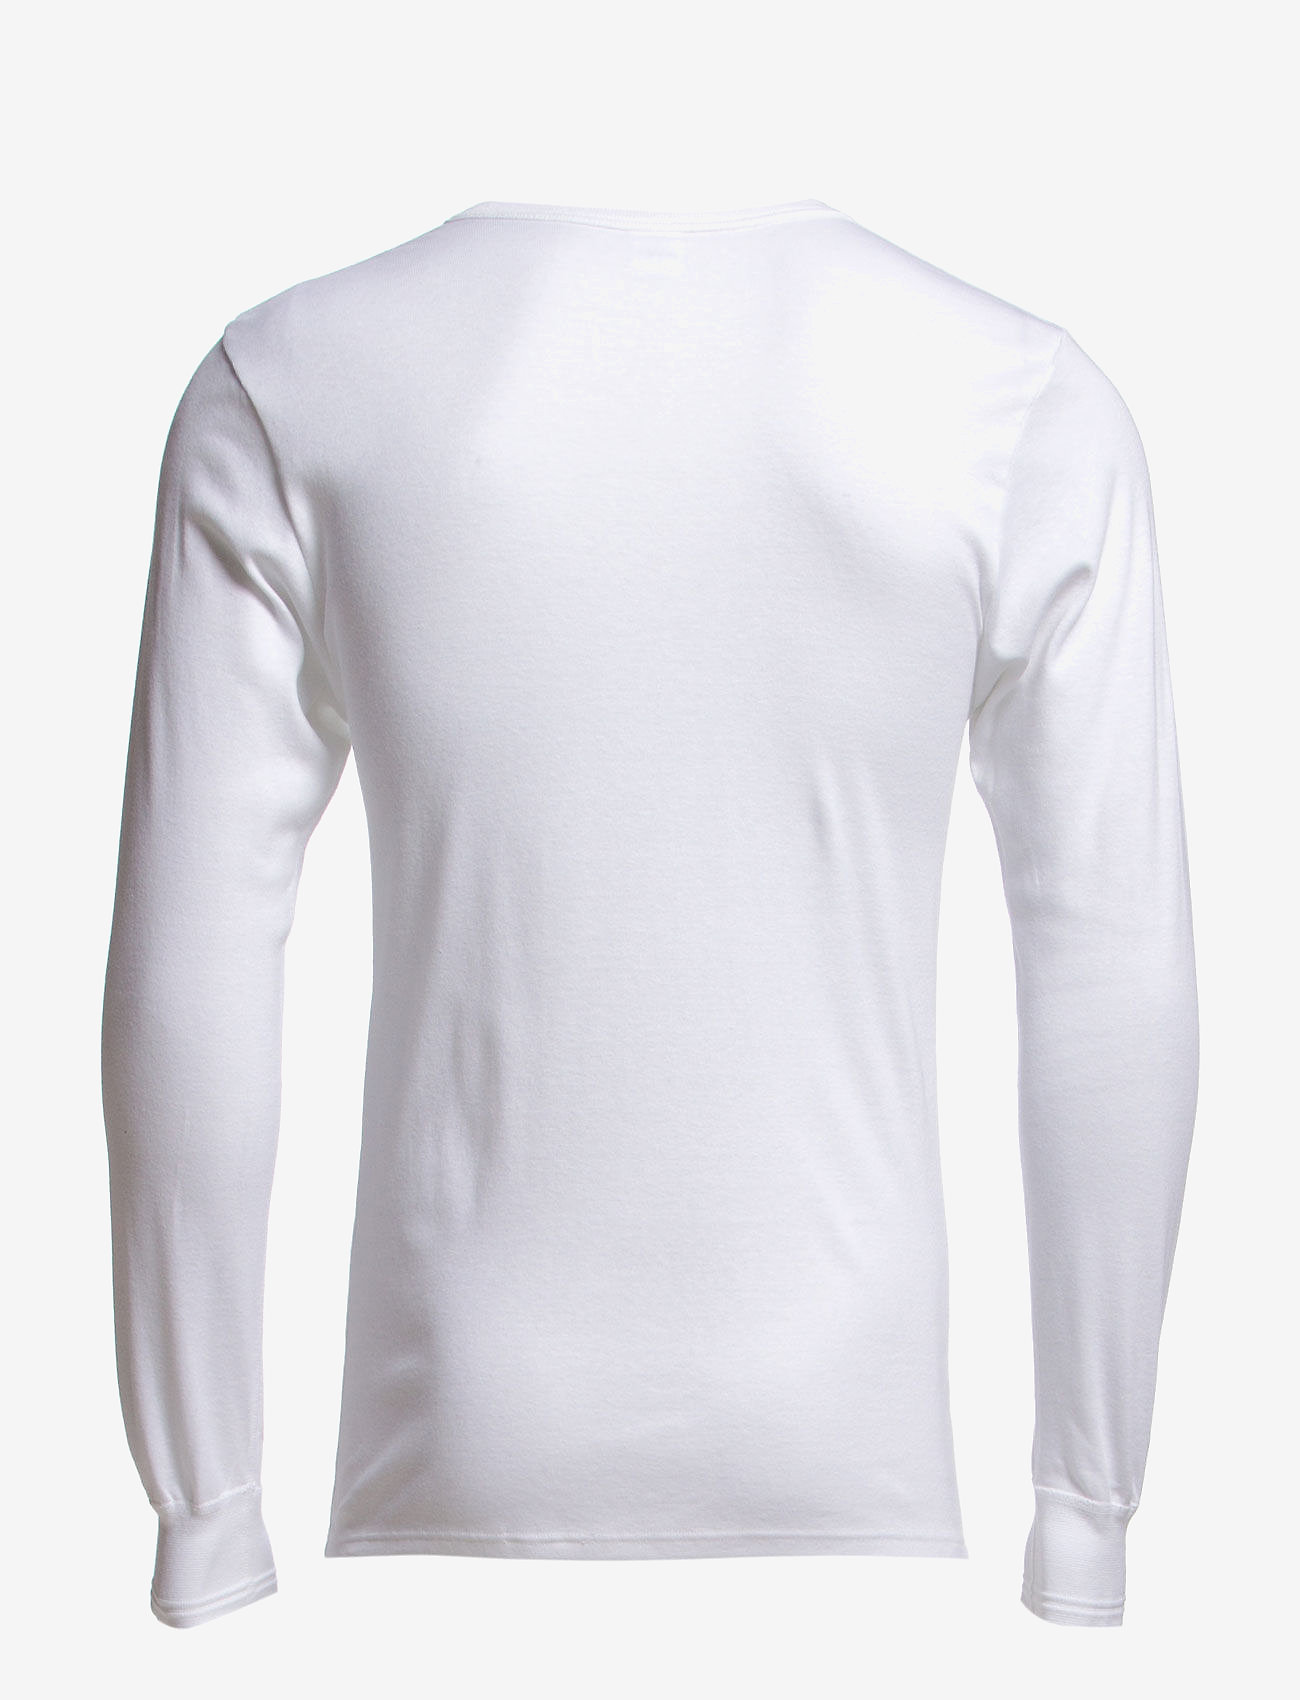 Dovre - Dovre T-shirt Long sleeves - base layers - white - 0